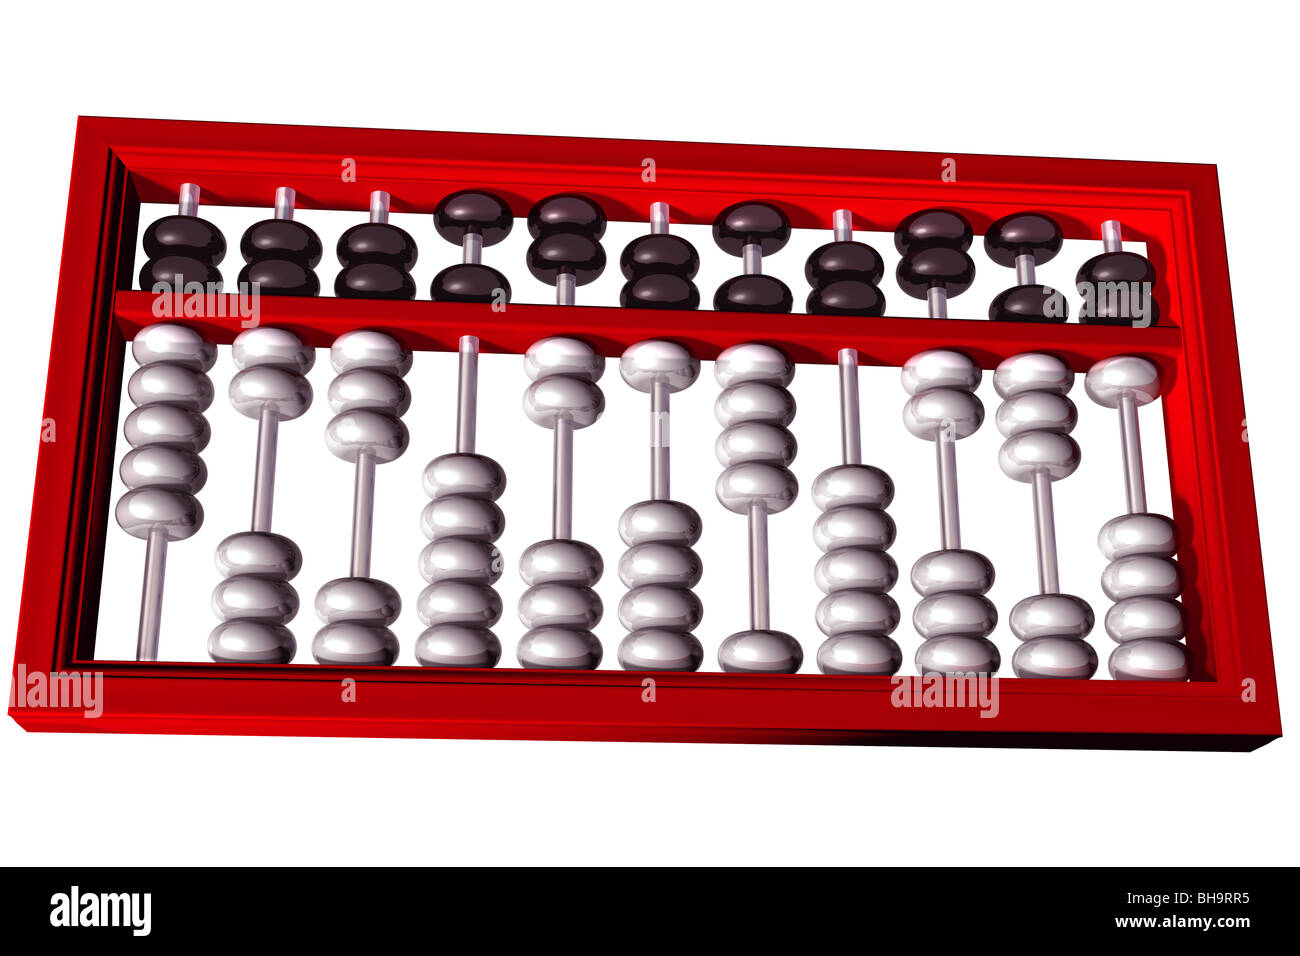 Isolated illustration of a traditional mathematical abacus Stock Photo